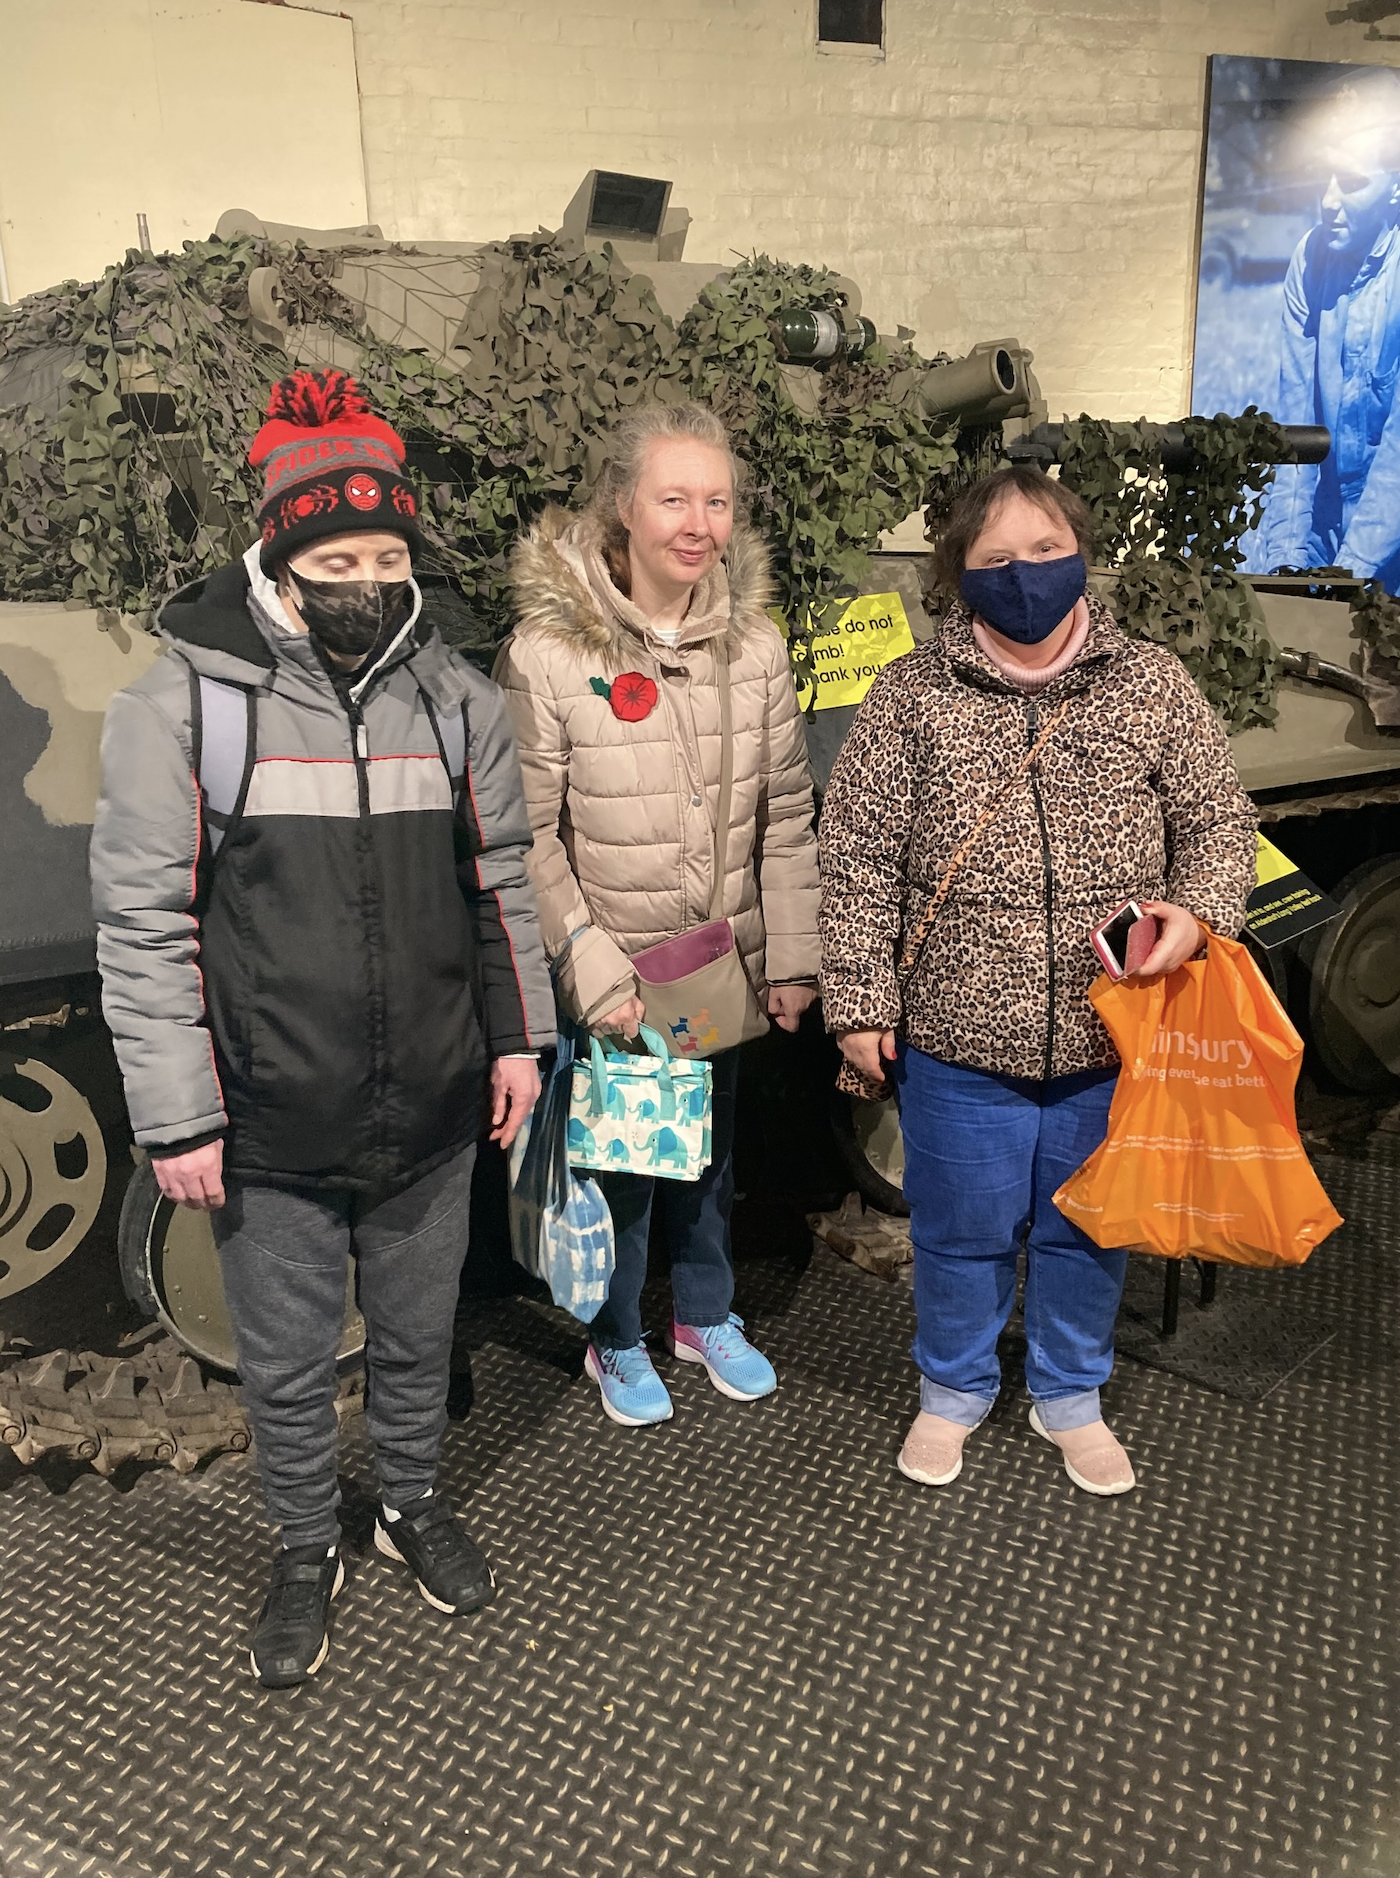 Some of the Farnham Group are stood in front of an army tank replica. They are smiling at the camera and two out of three people are wearing a face mask.